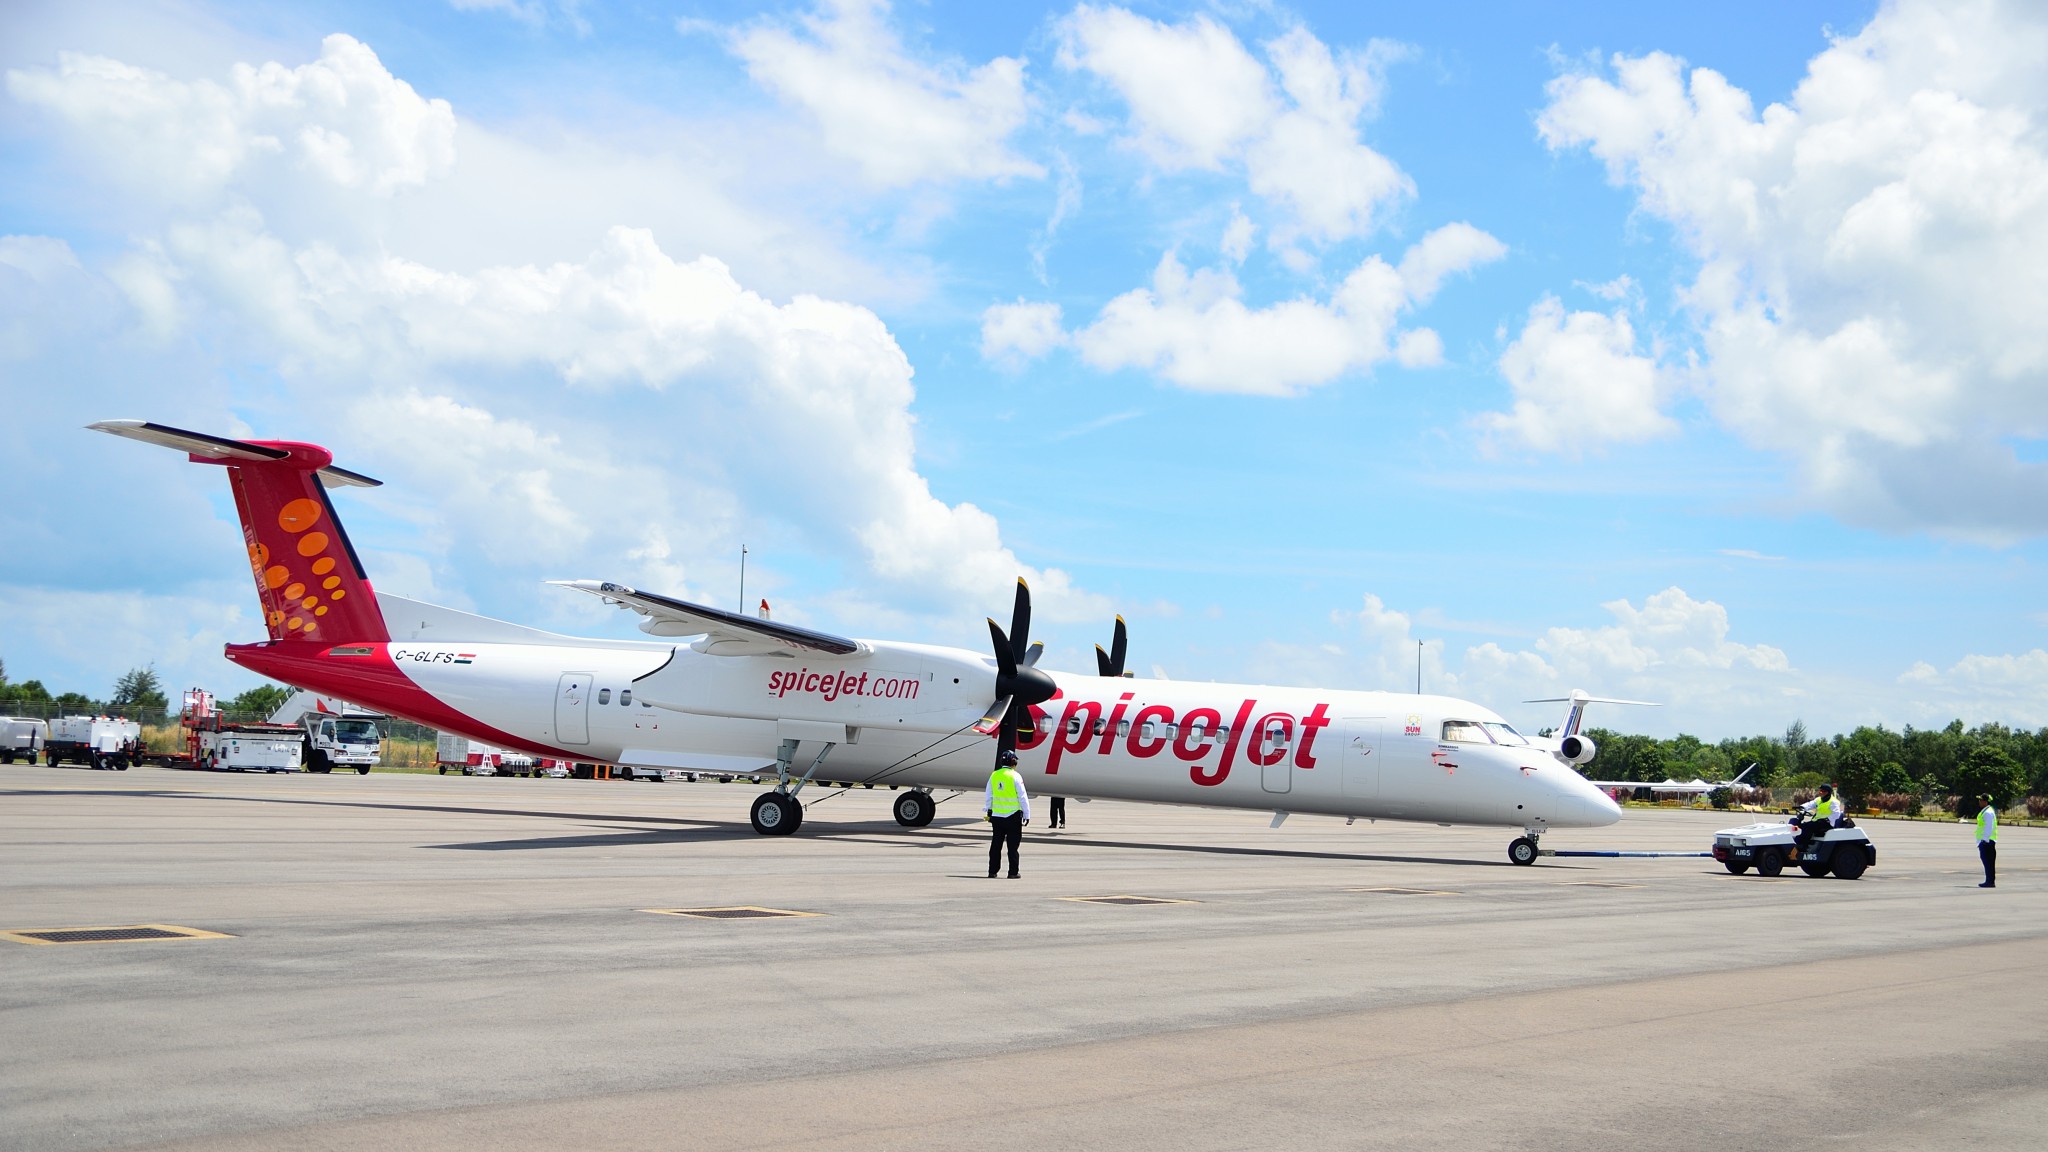 SpiceJet continues to rise as it posts highest-ever Q1 2019 profit